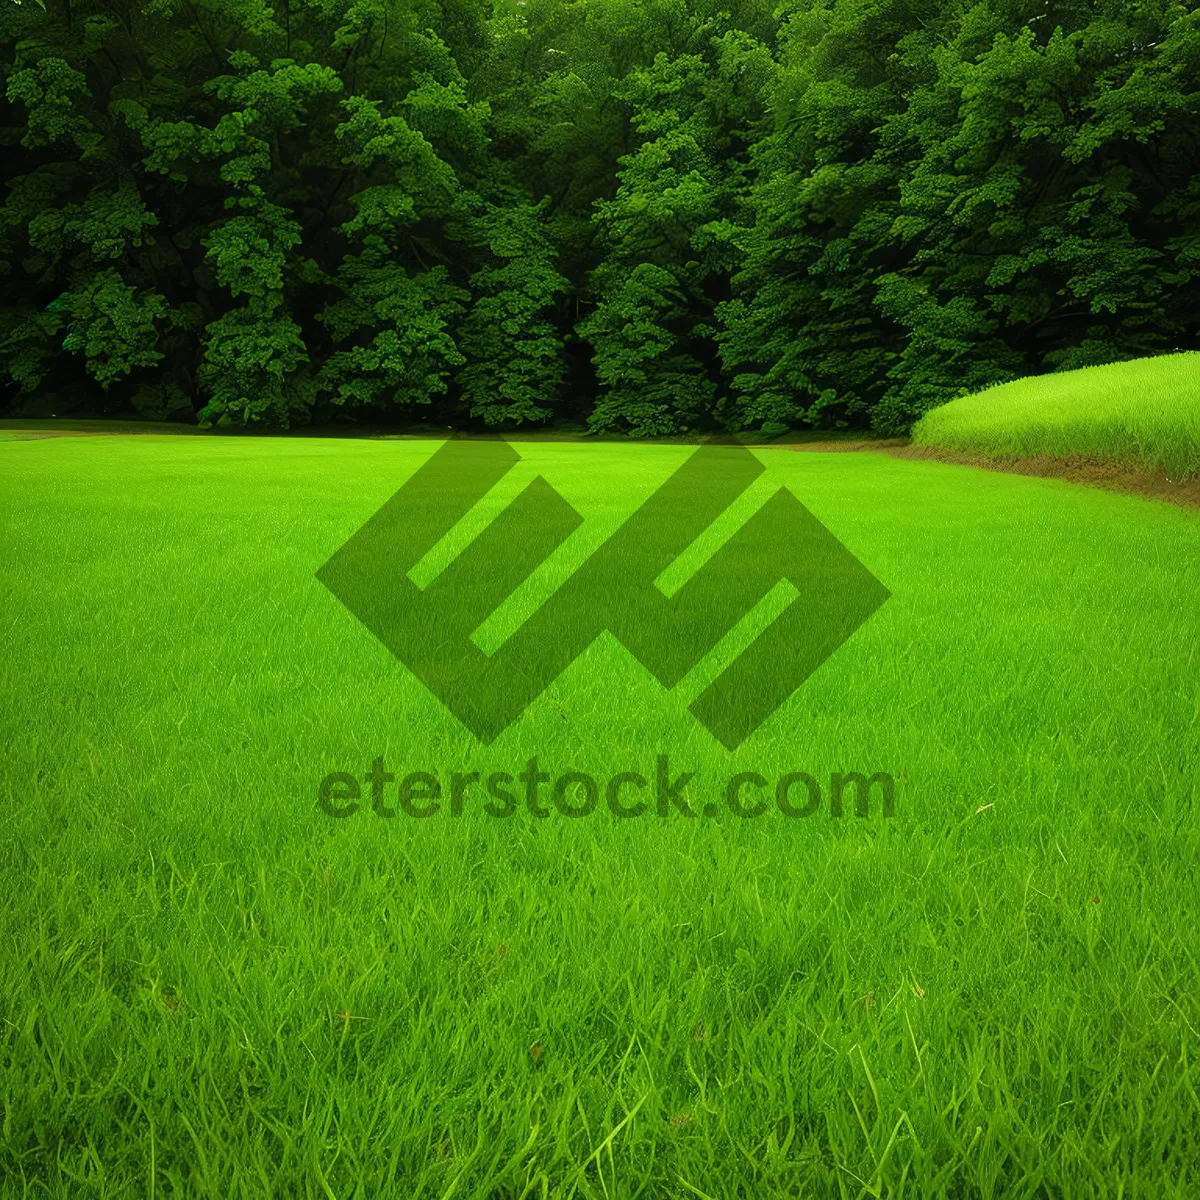 Picture of Lush Green Golf Course under Clear Summer Skies